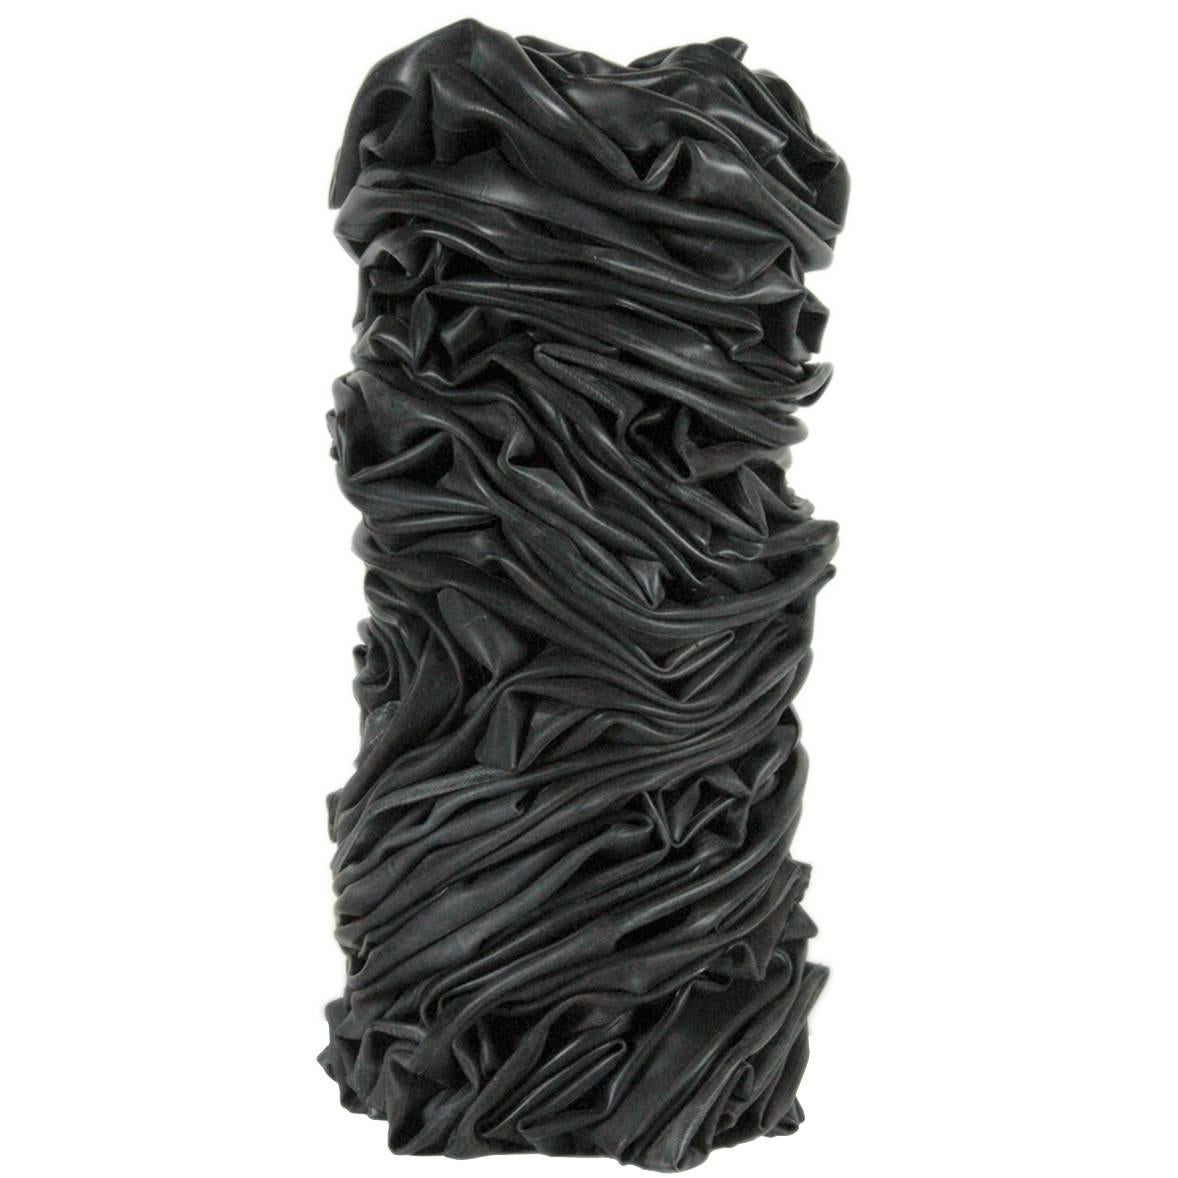 Rubber Wrapped Vase by Gregor Turk For Sale